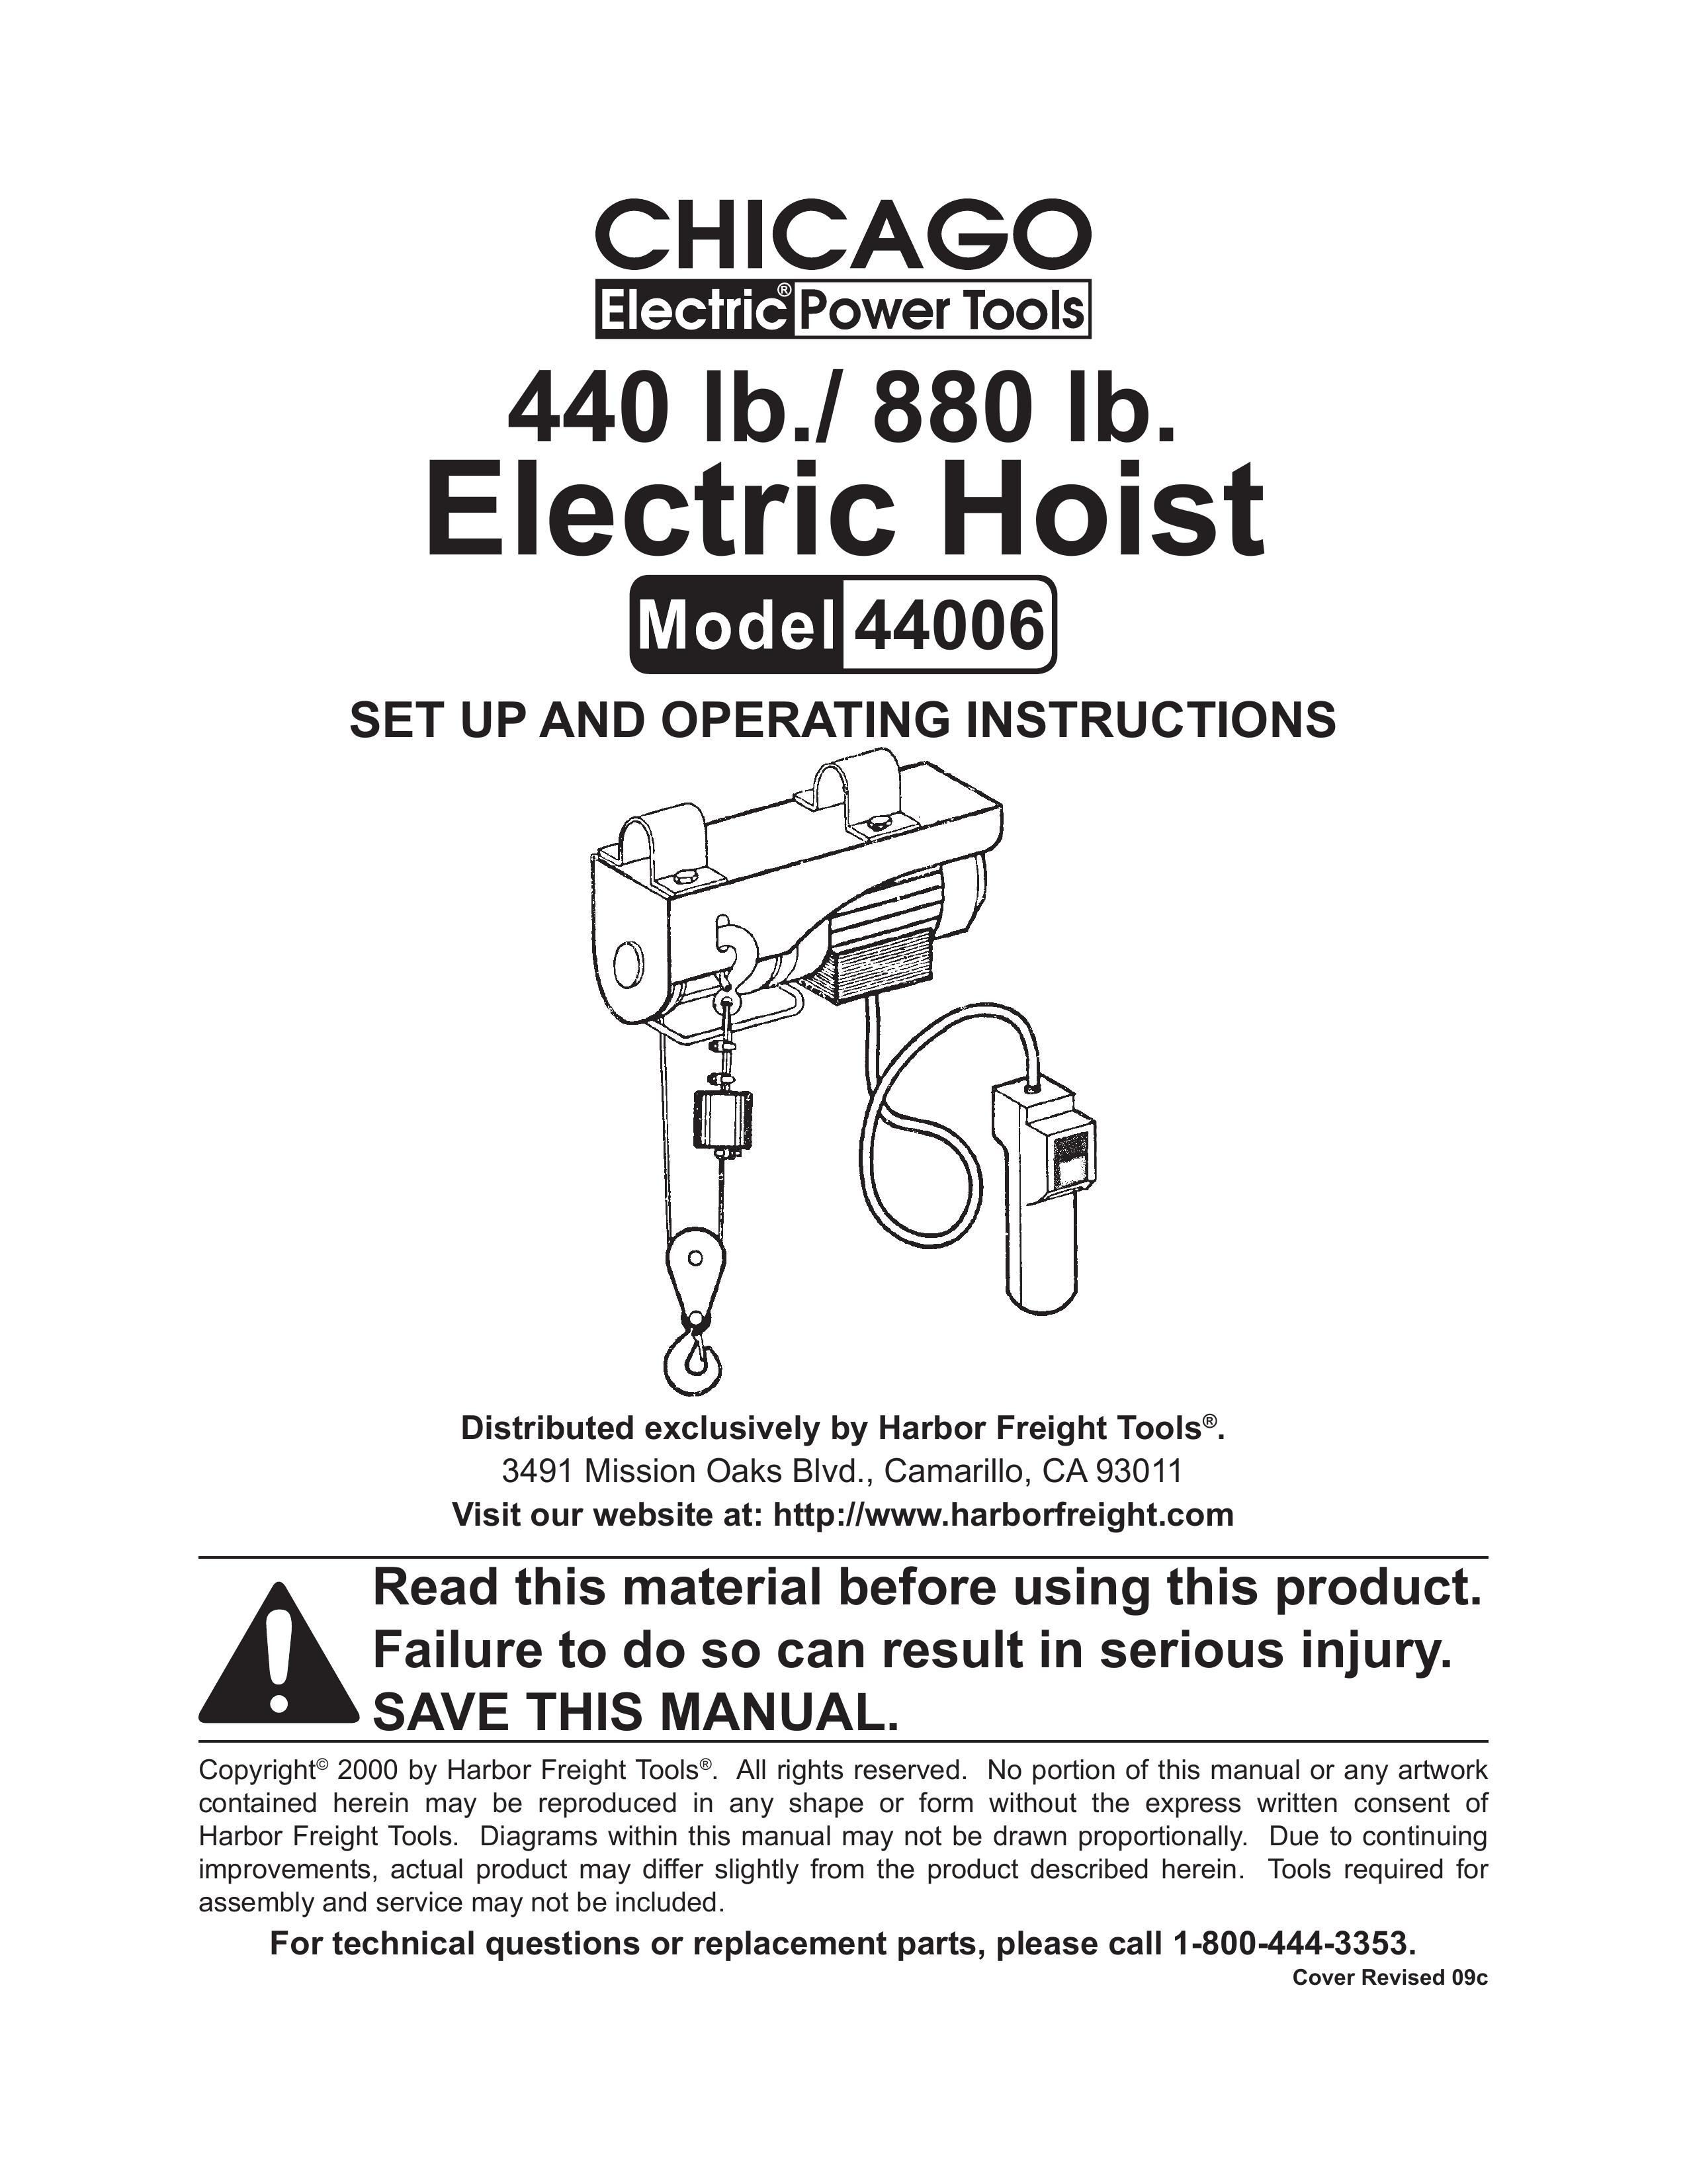 Chicago Electric 44006 Personal Lift User Manual